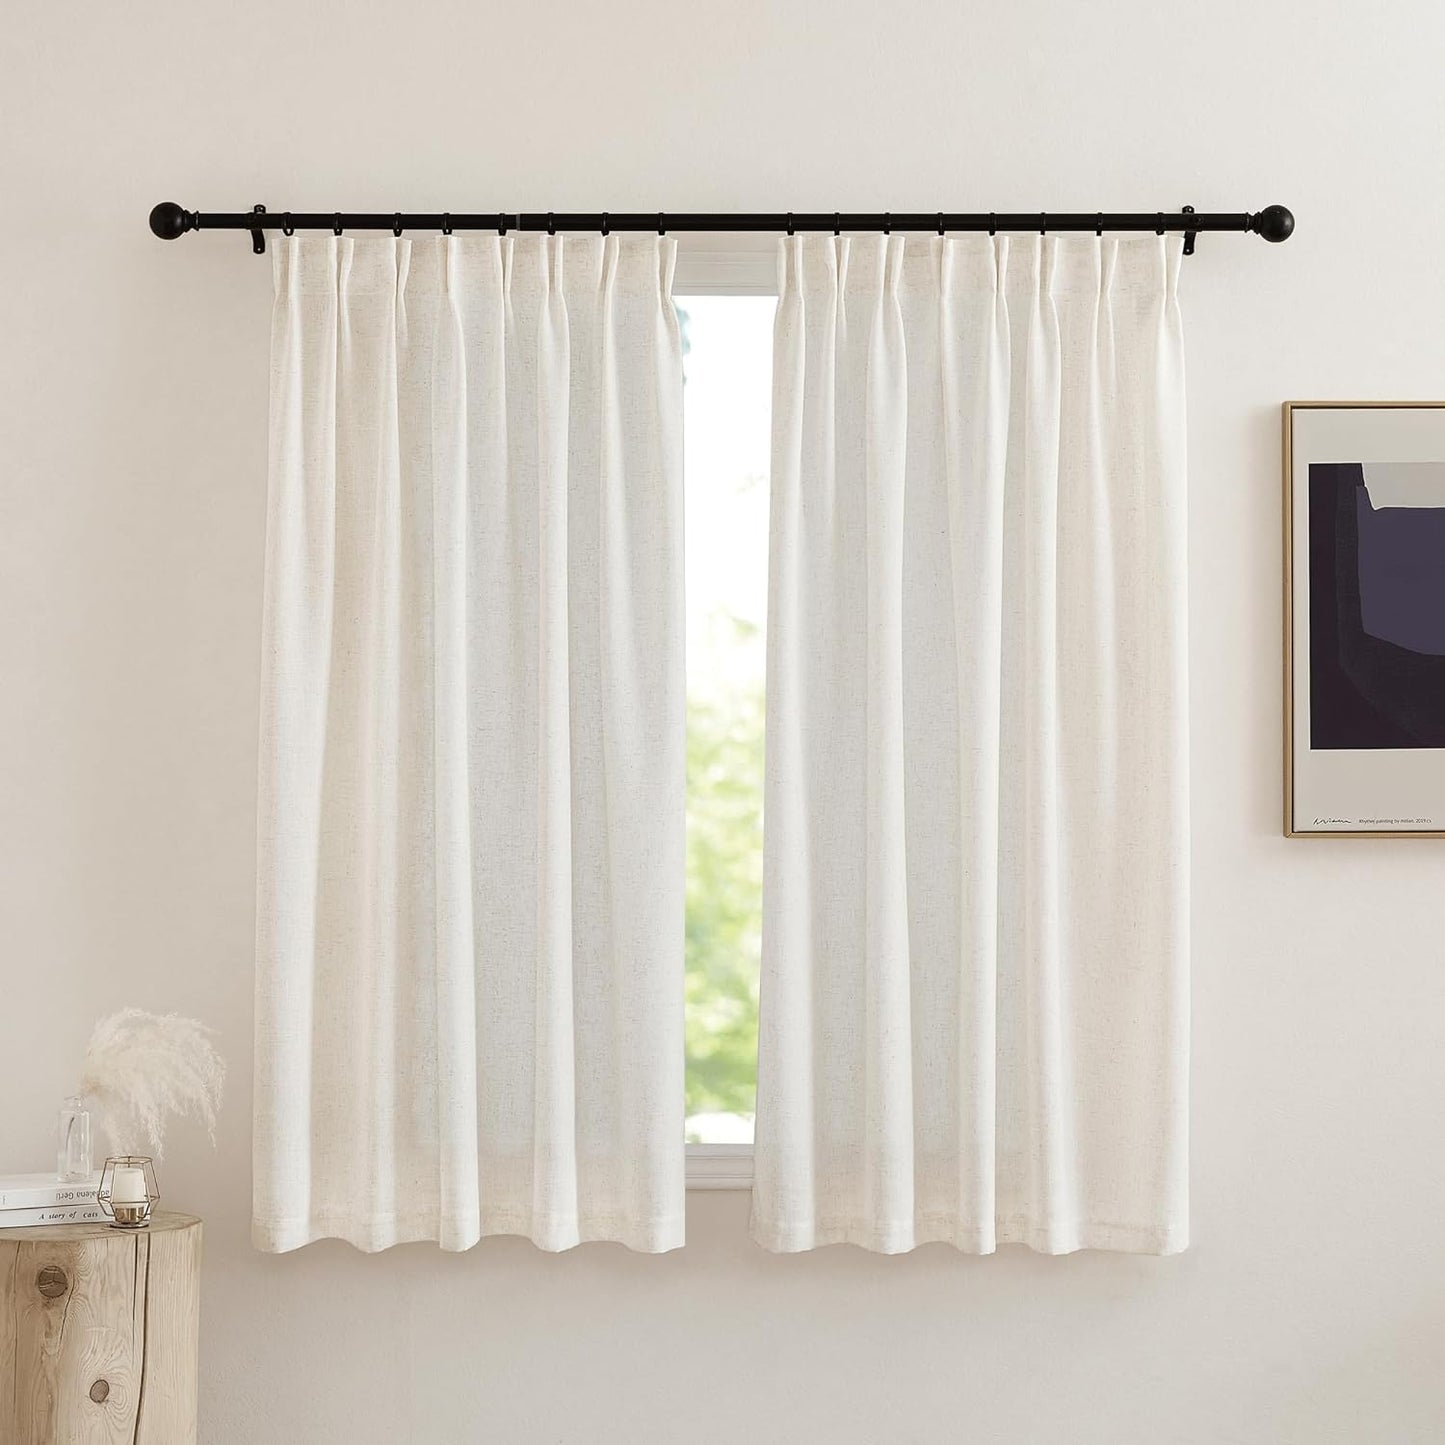 NICETOWN White Curtains Sheer - Semi Sheer Window Covering, Light & Airy Privacy Rod Pocket Back Tab Pinche Pleated Drapes for Bedroom Living Room Patio Glass Door, 52 X 63 Inches Long, Set of 2  NICETOWN Linen W52 X L63 